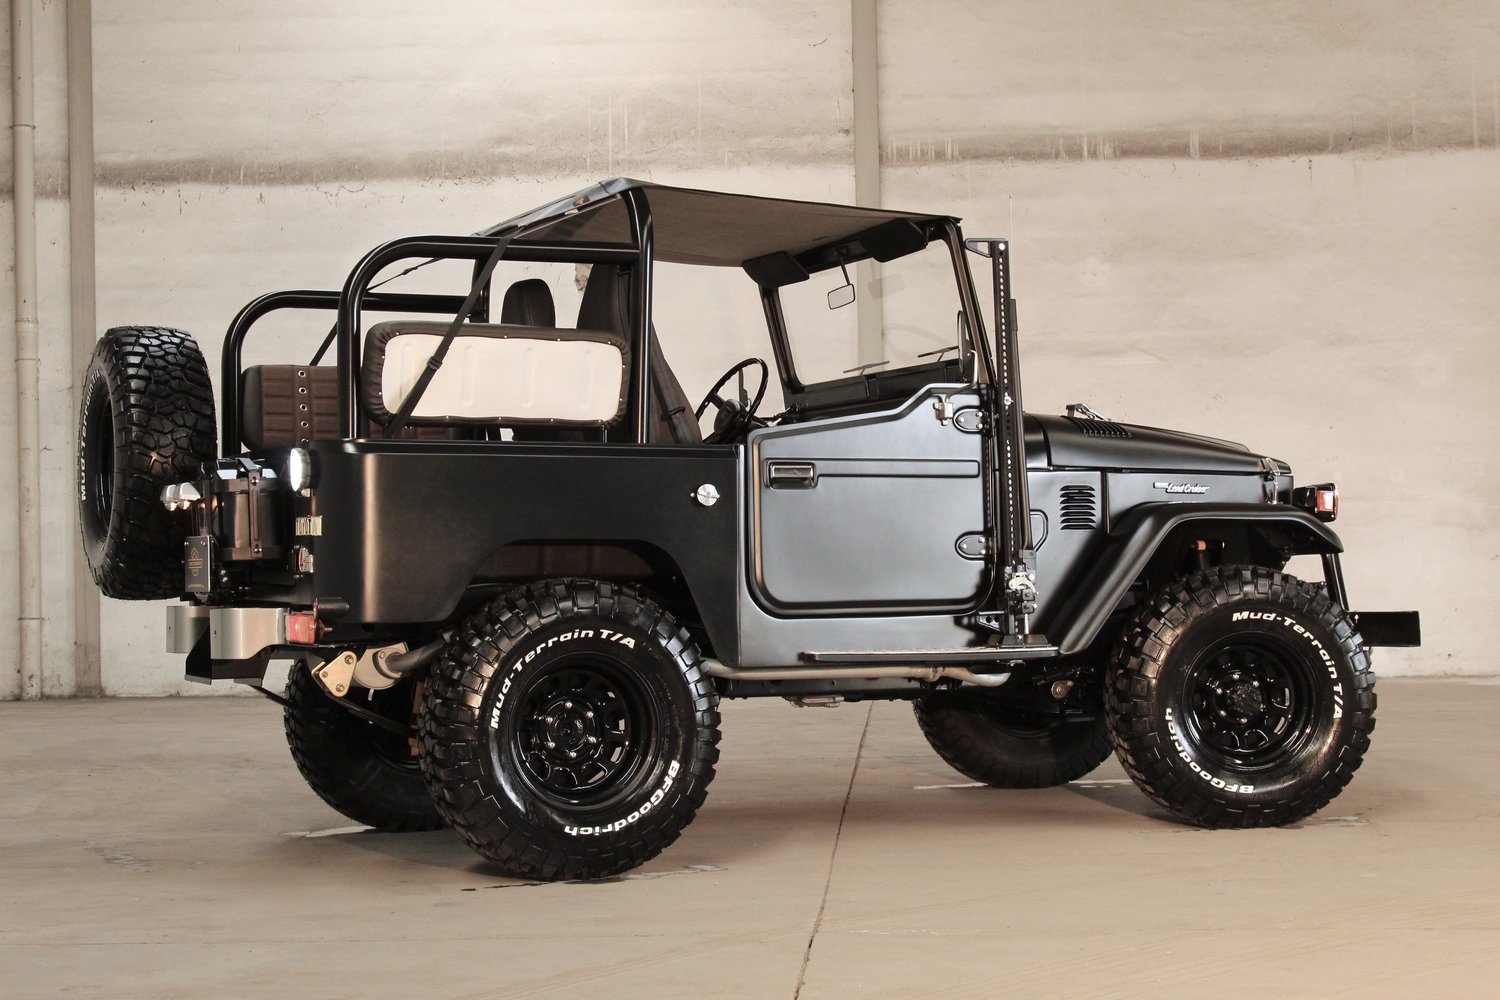 Departing from the beaten path, this 1985 Toyota Land Cruiser build is a custom-designed, aggressive build. Finished in matte black exterior with a simply spectacular interior, this Land Cruiser is a force to be reckoned with. 

#toyota #landcruiser 